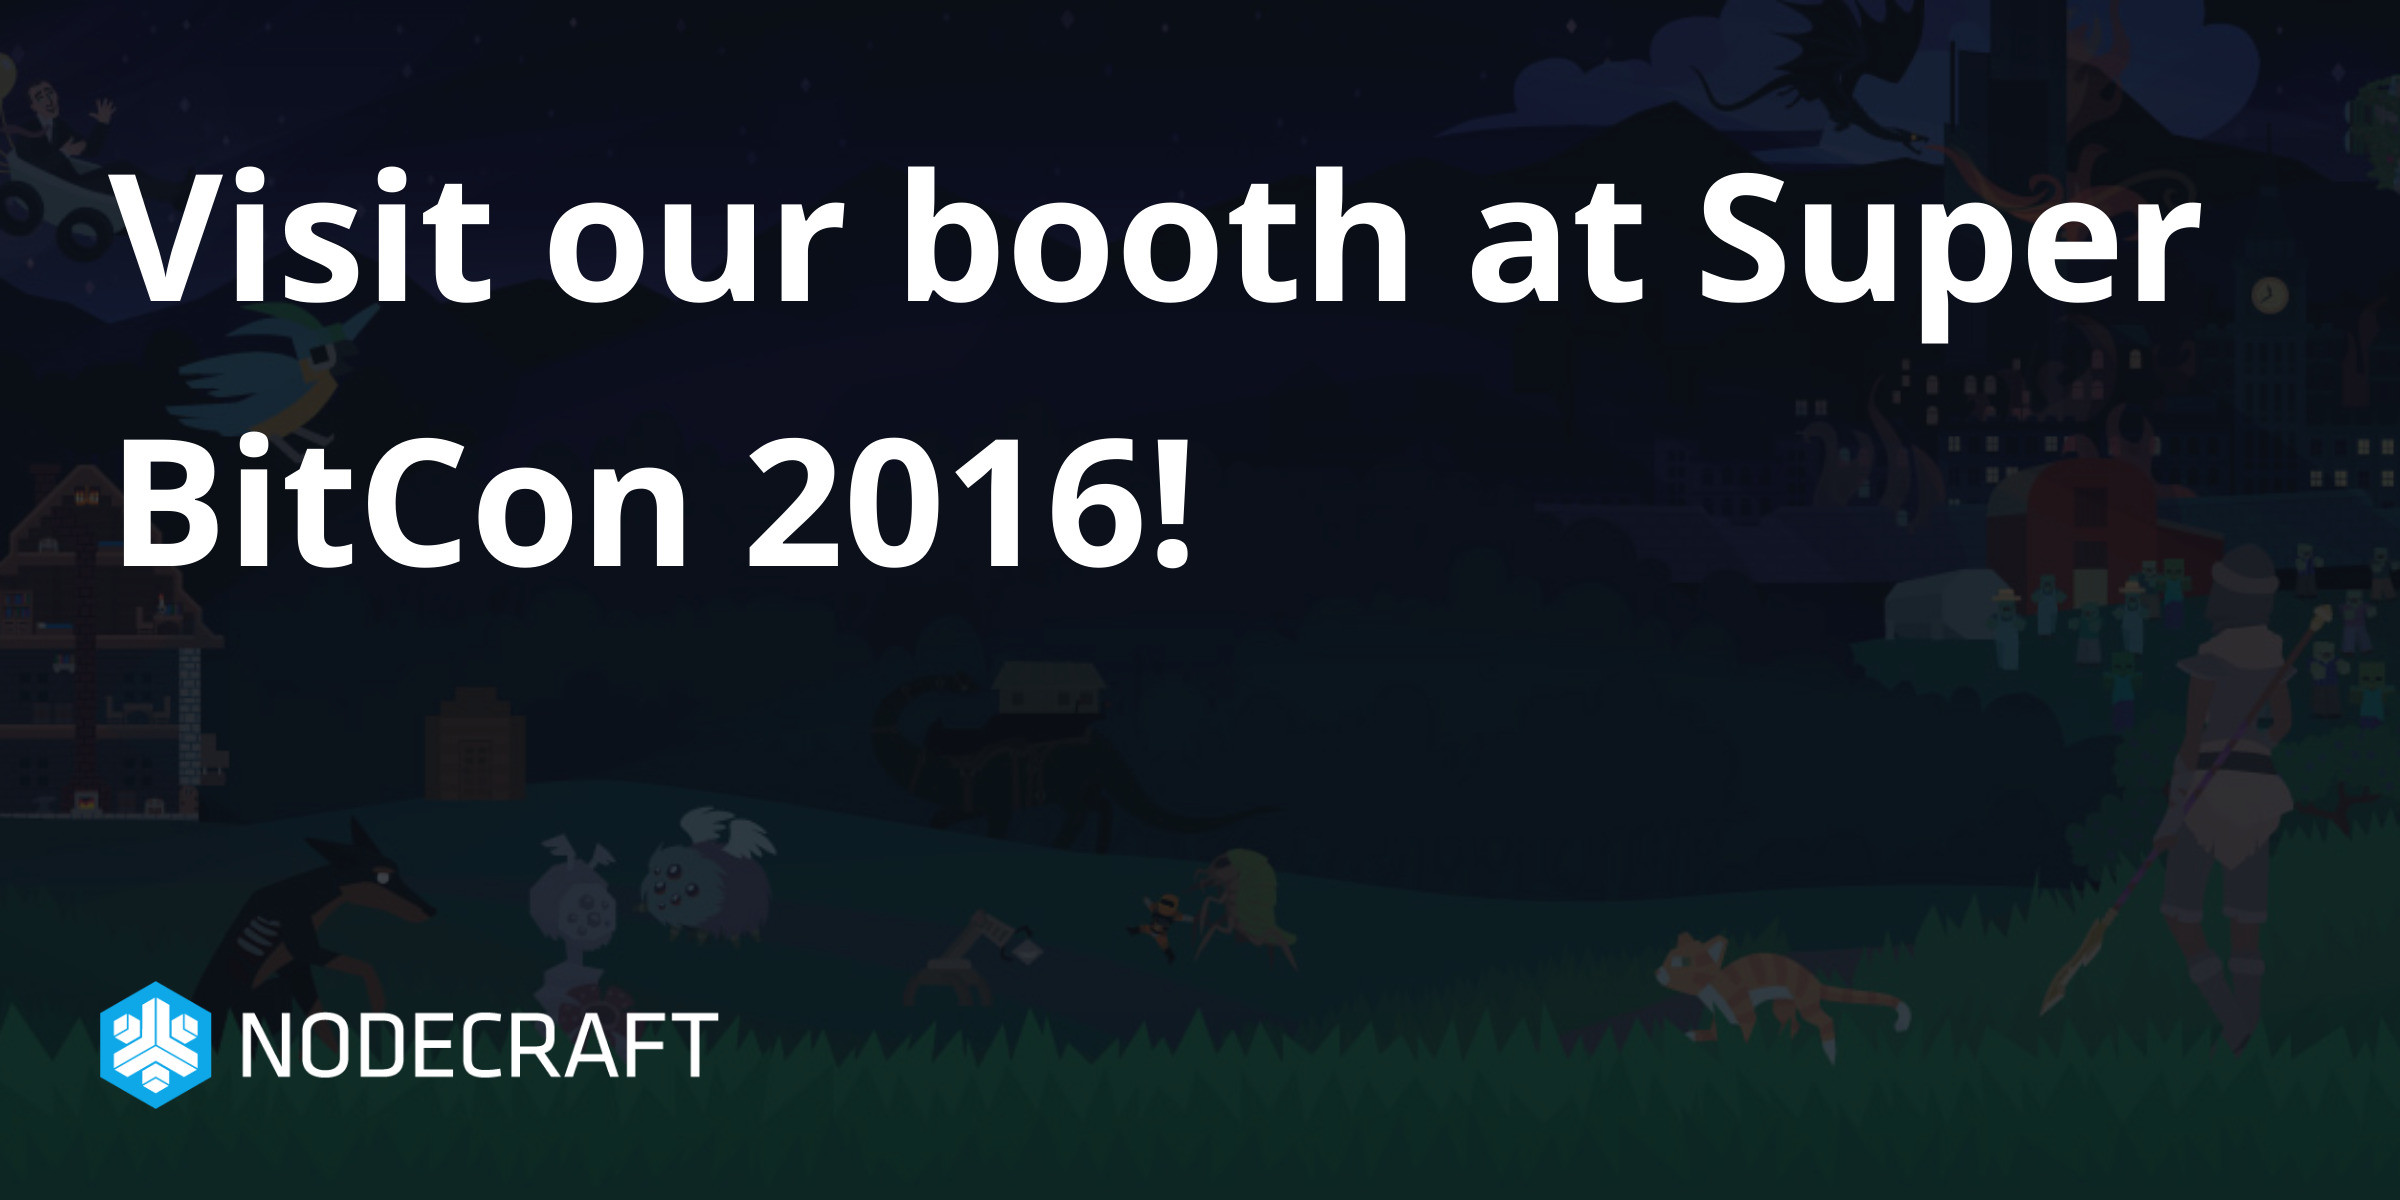 Visit our booth at Super BitCon 2016!